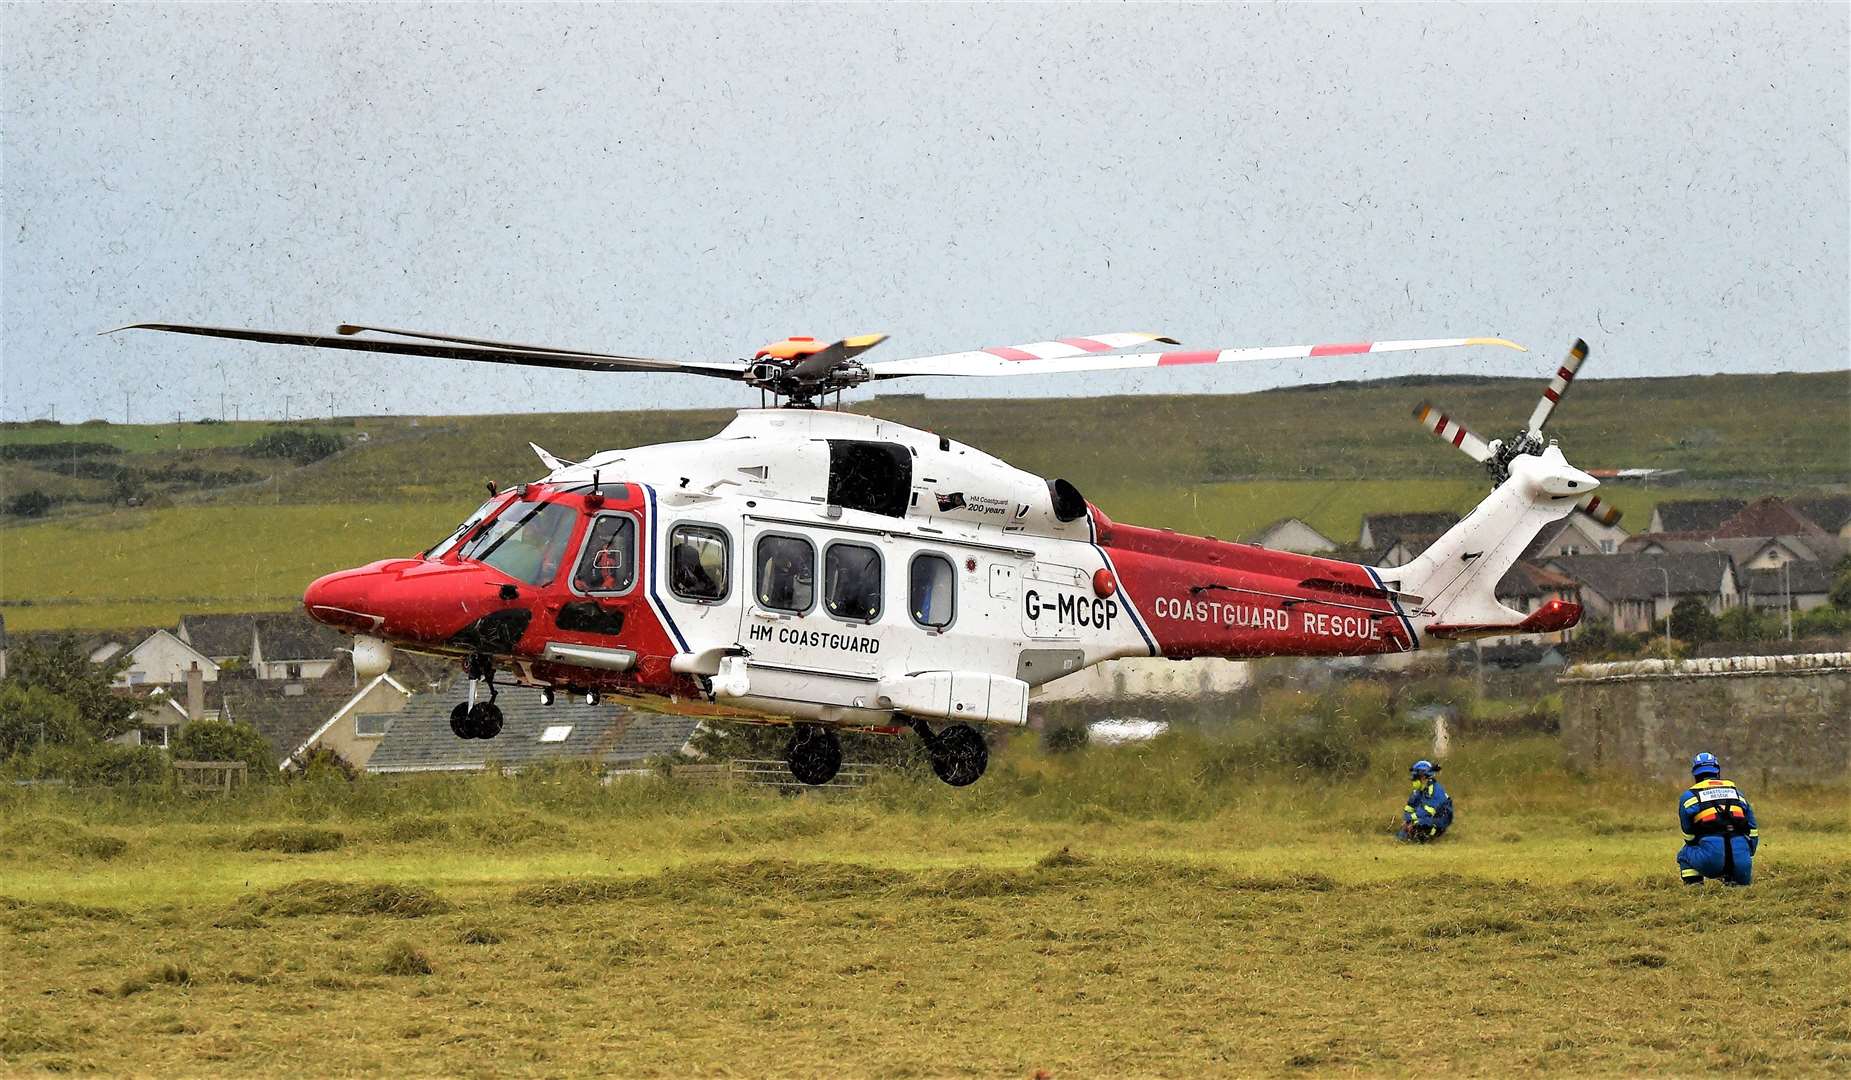 Newly cut grass flies in the air as the Coastguard helicopter lands near Victoria Walk. Picture: Mel Roger